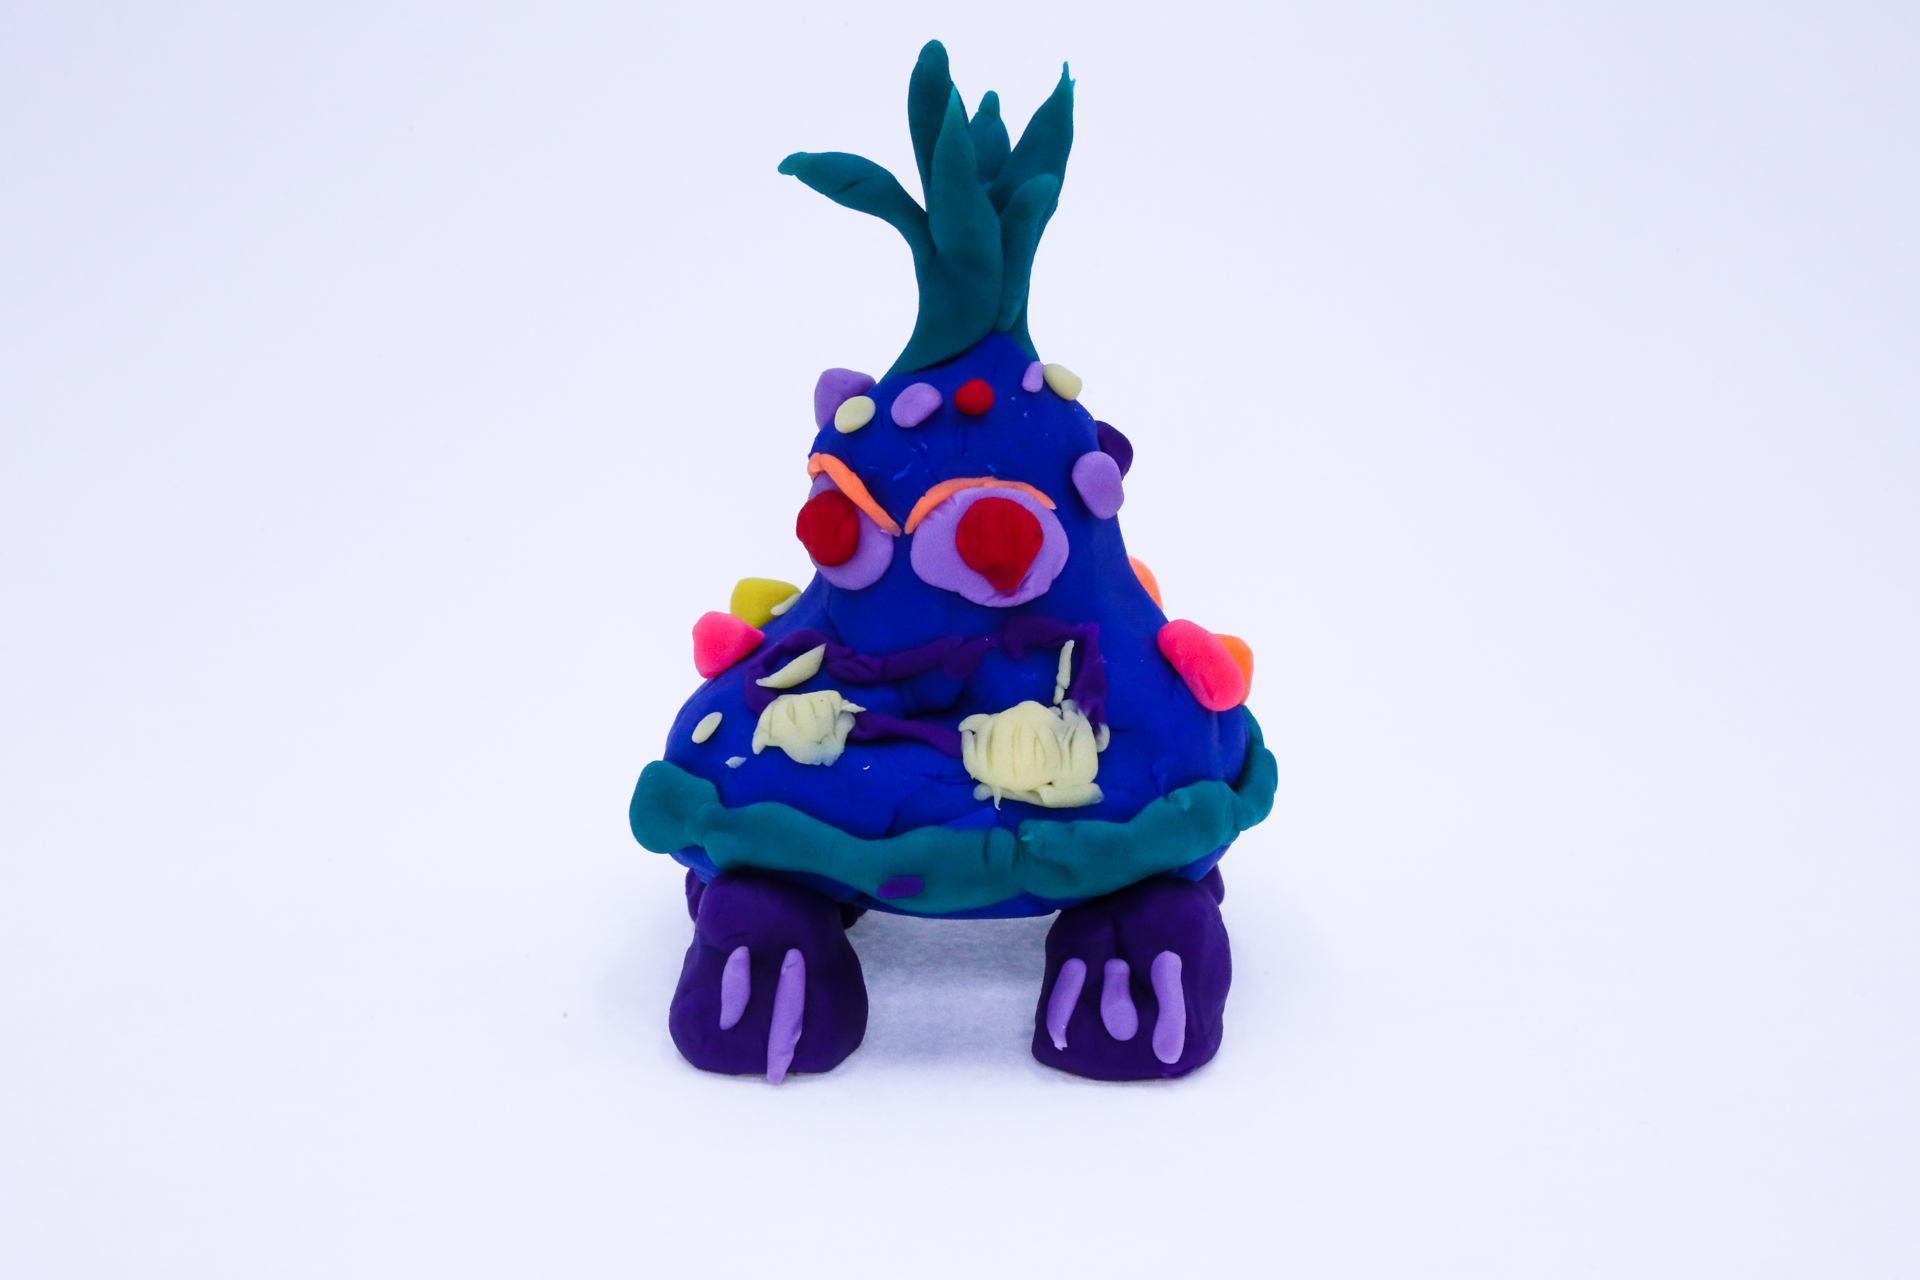 Blob Blob is a play-dough sculpture that features a grass head, angry eyes and a blob body.